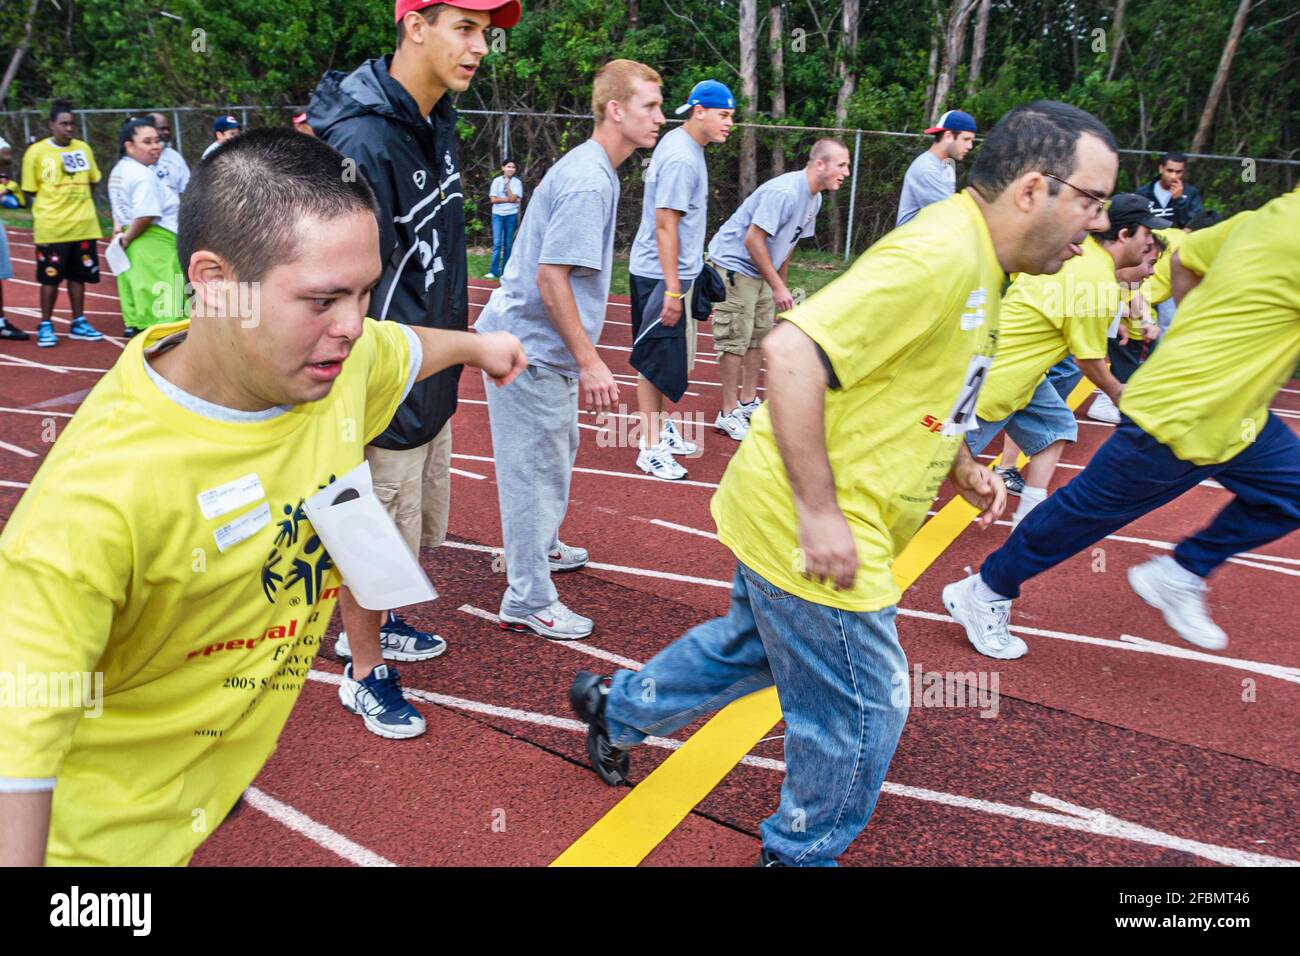 Florida North Miami FIU campus Special Olympics Summer Games,mentally disabled starting line foot race man men, Stock Photo